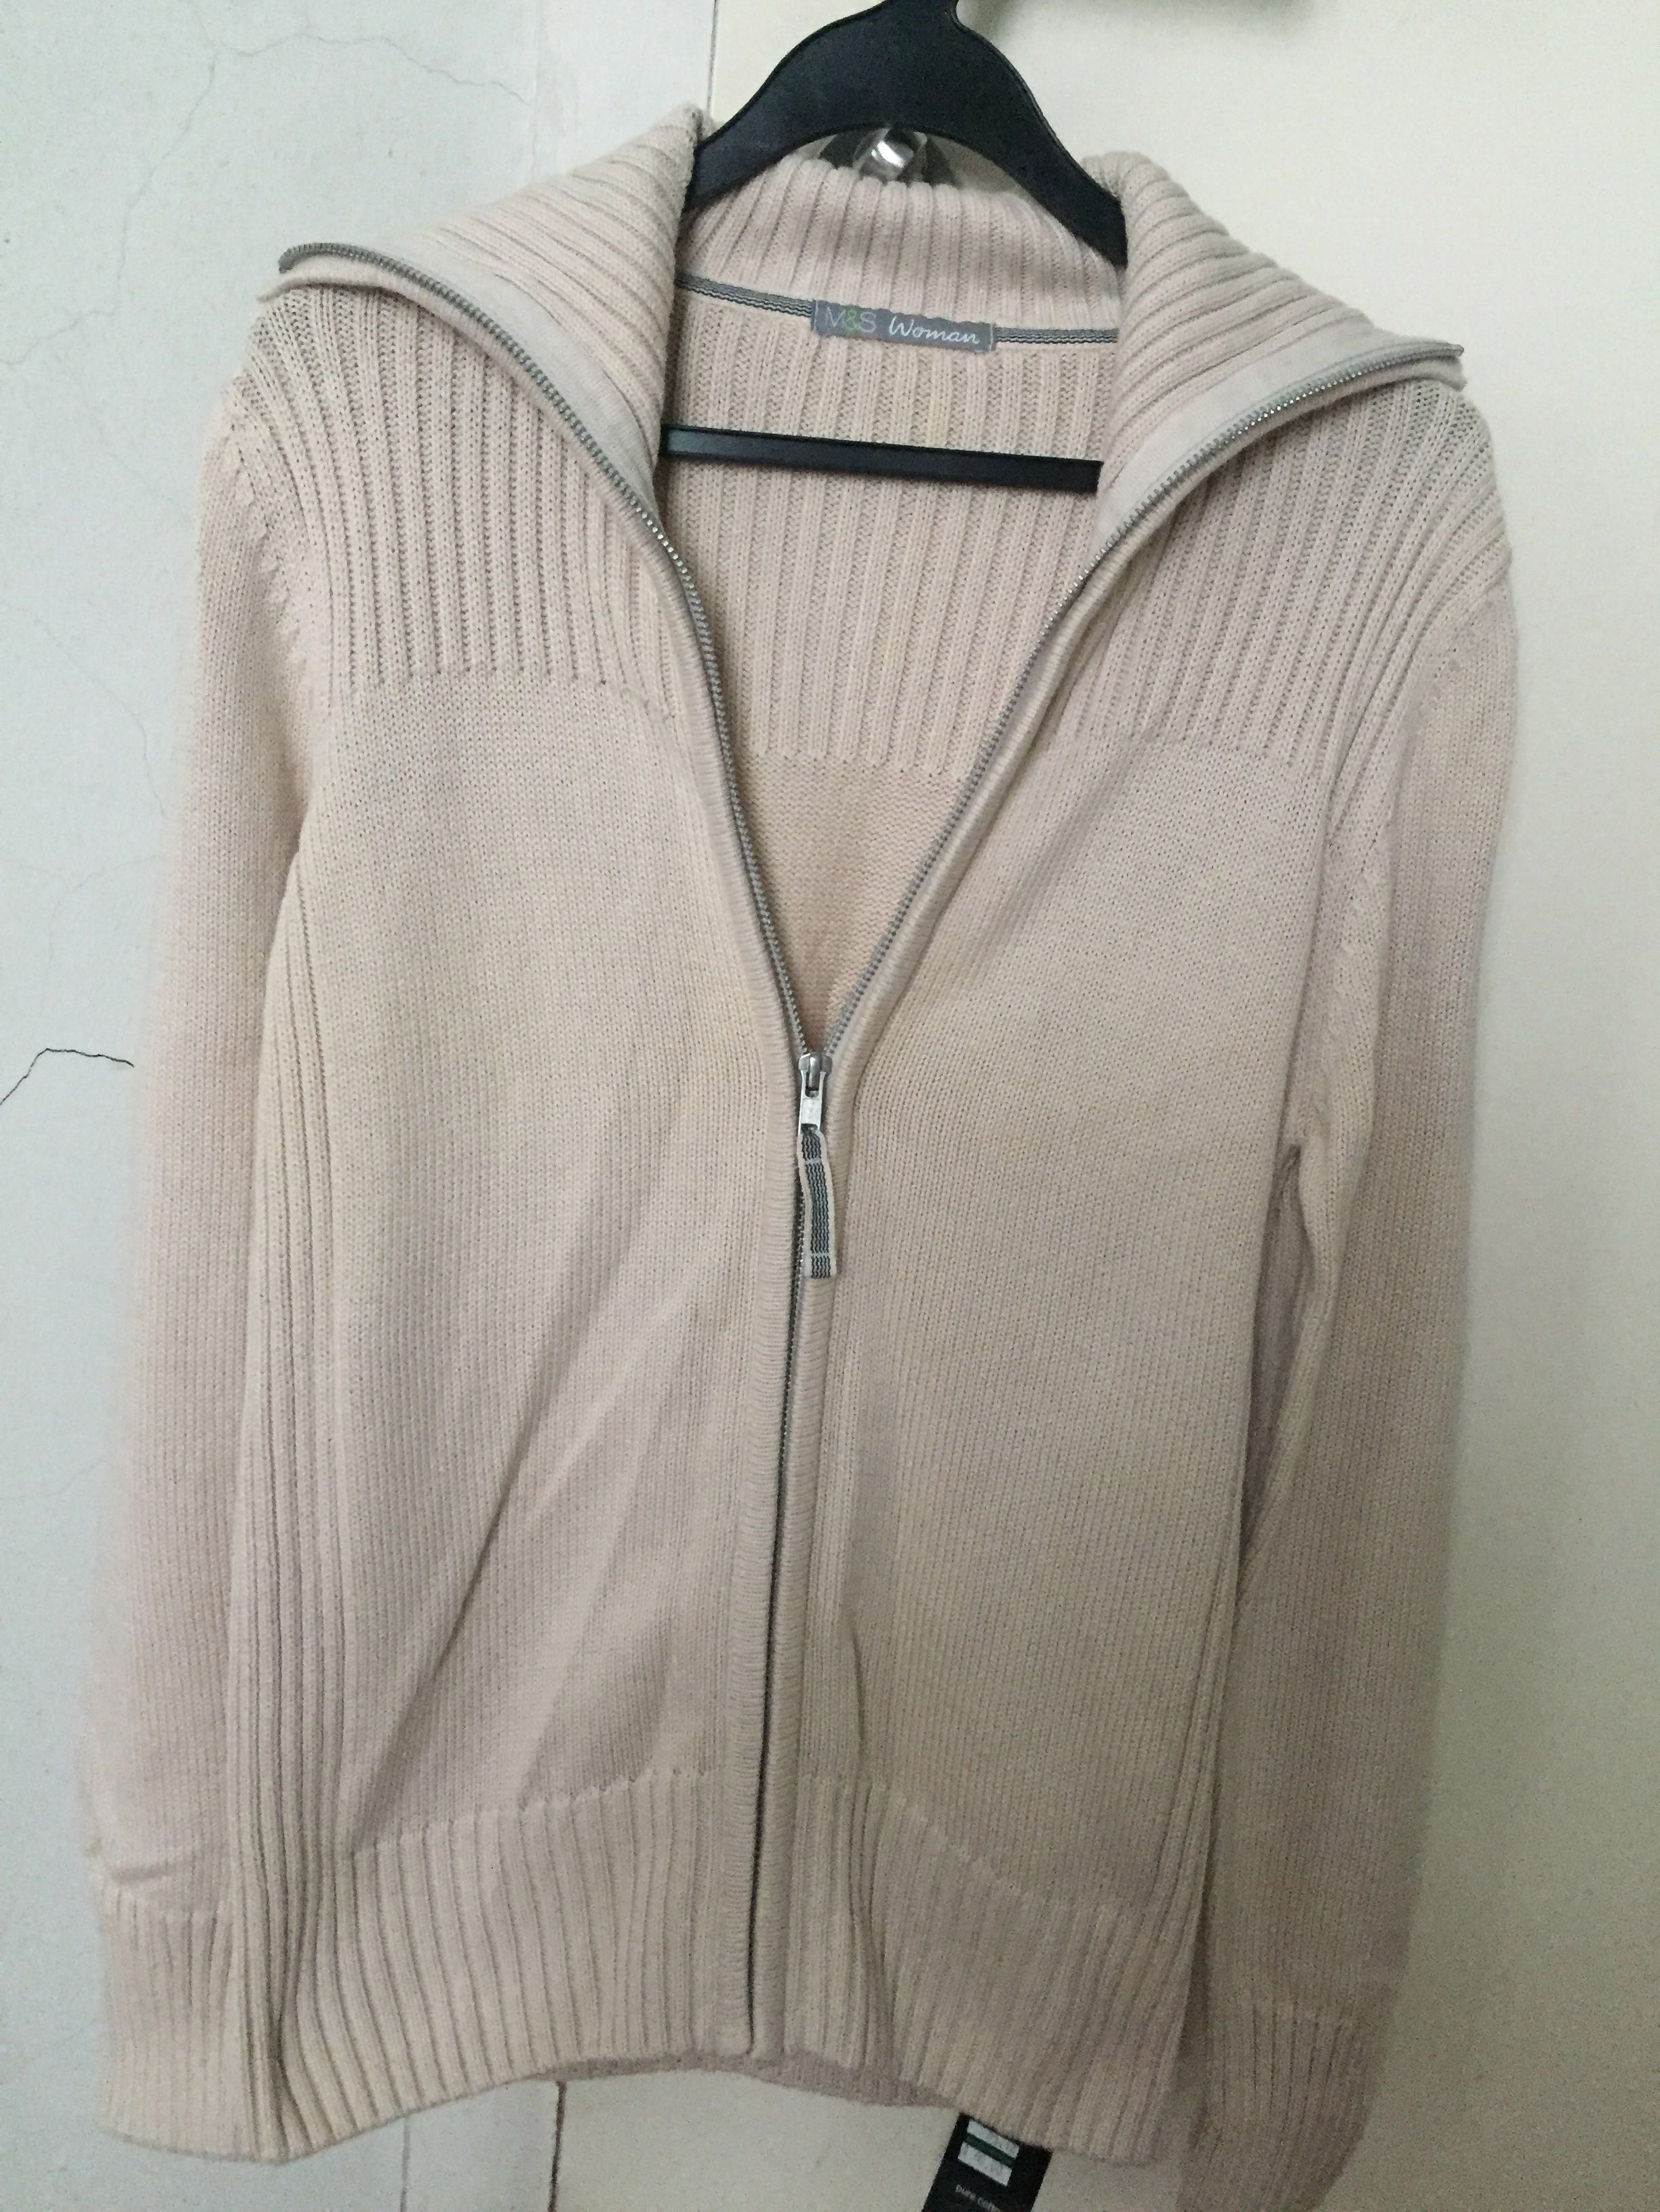 ladies zip up cardigans at marks and spencers